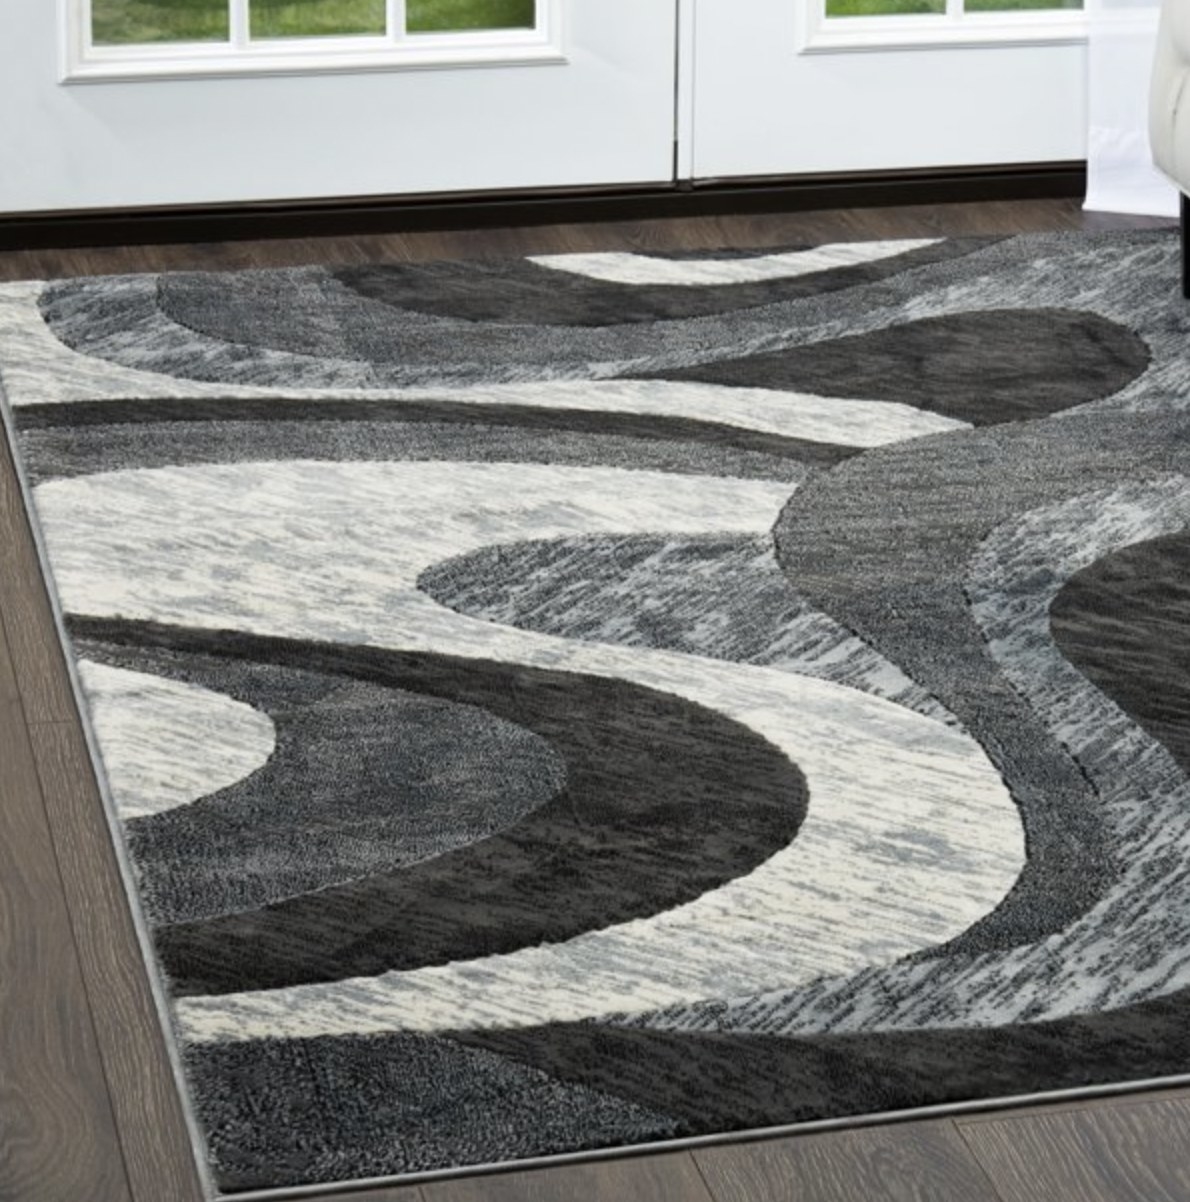 The grey and white abstract swirly-patterned area rug on a hardwood floor